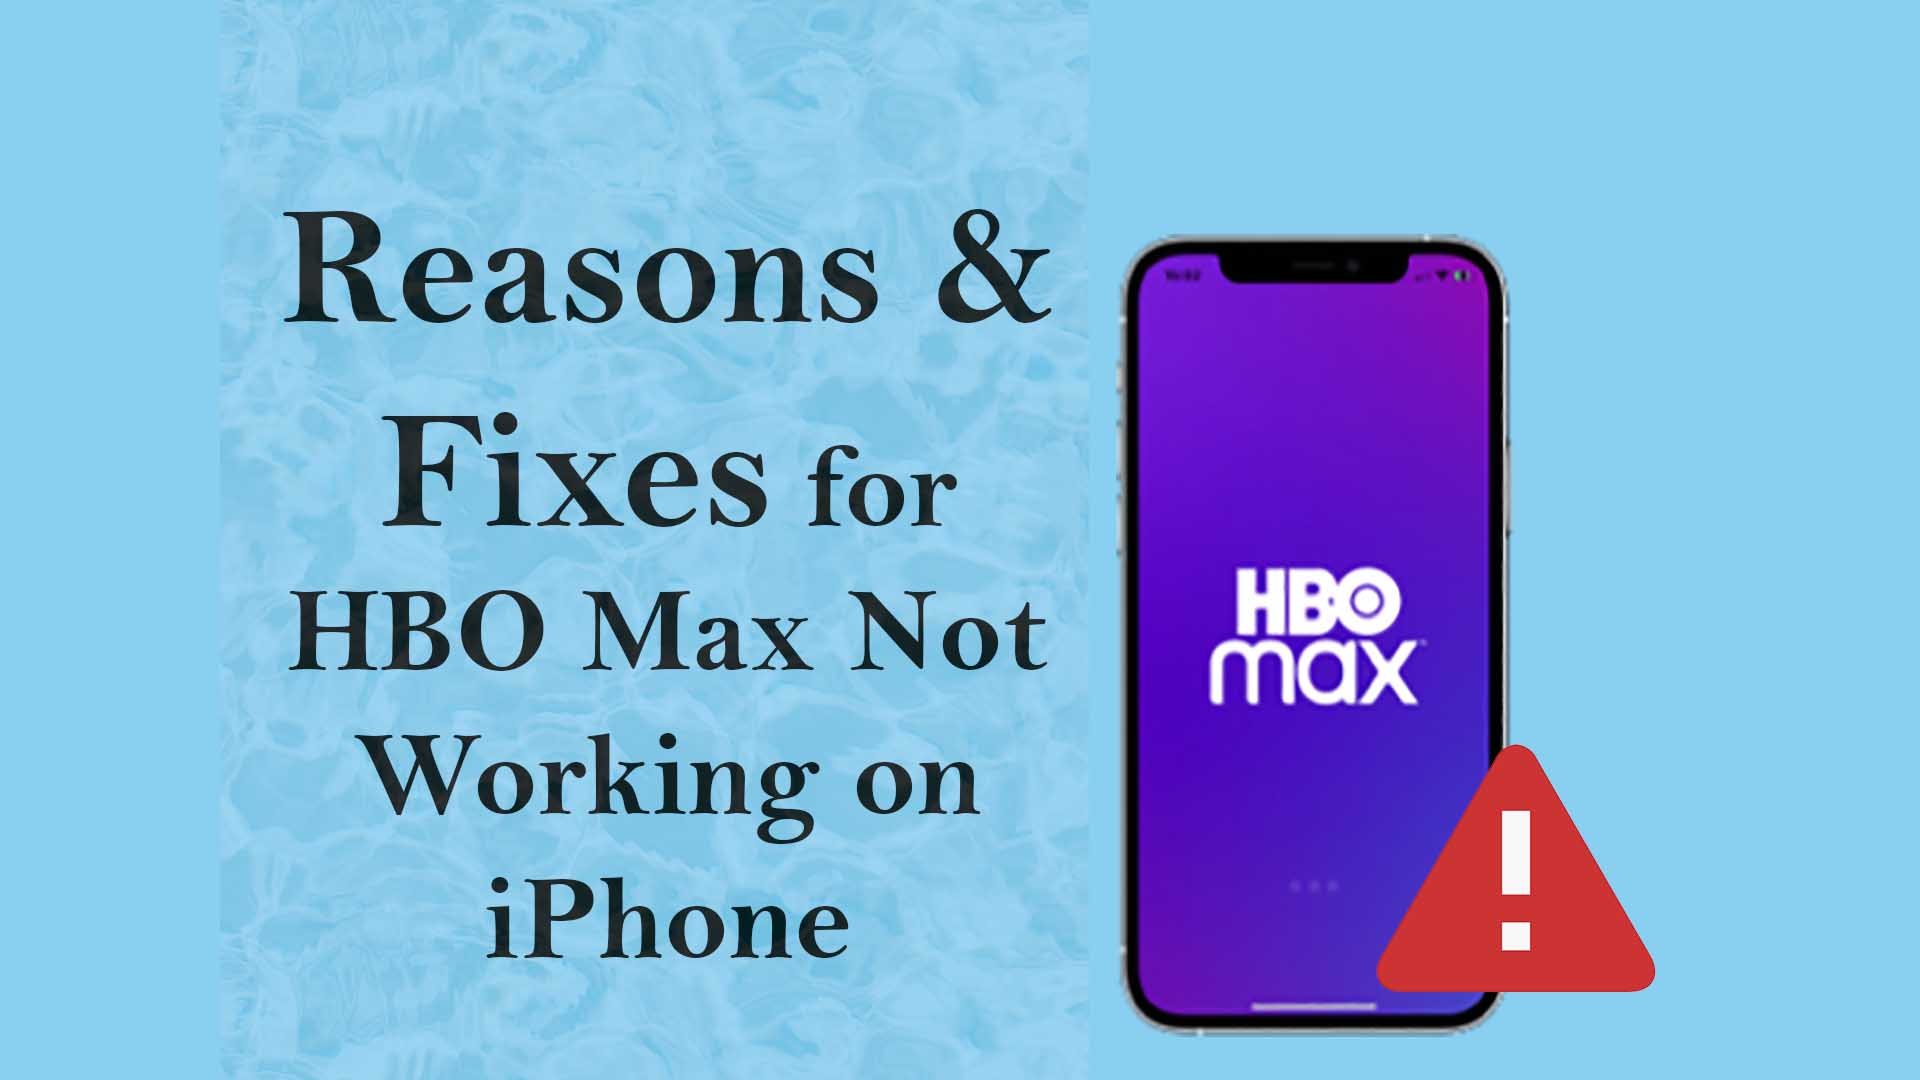 Why is HBO Max Not Working on iPhone? And How to Fix it?